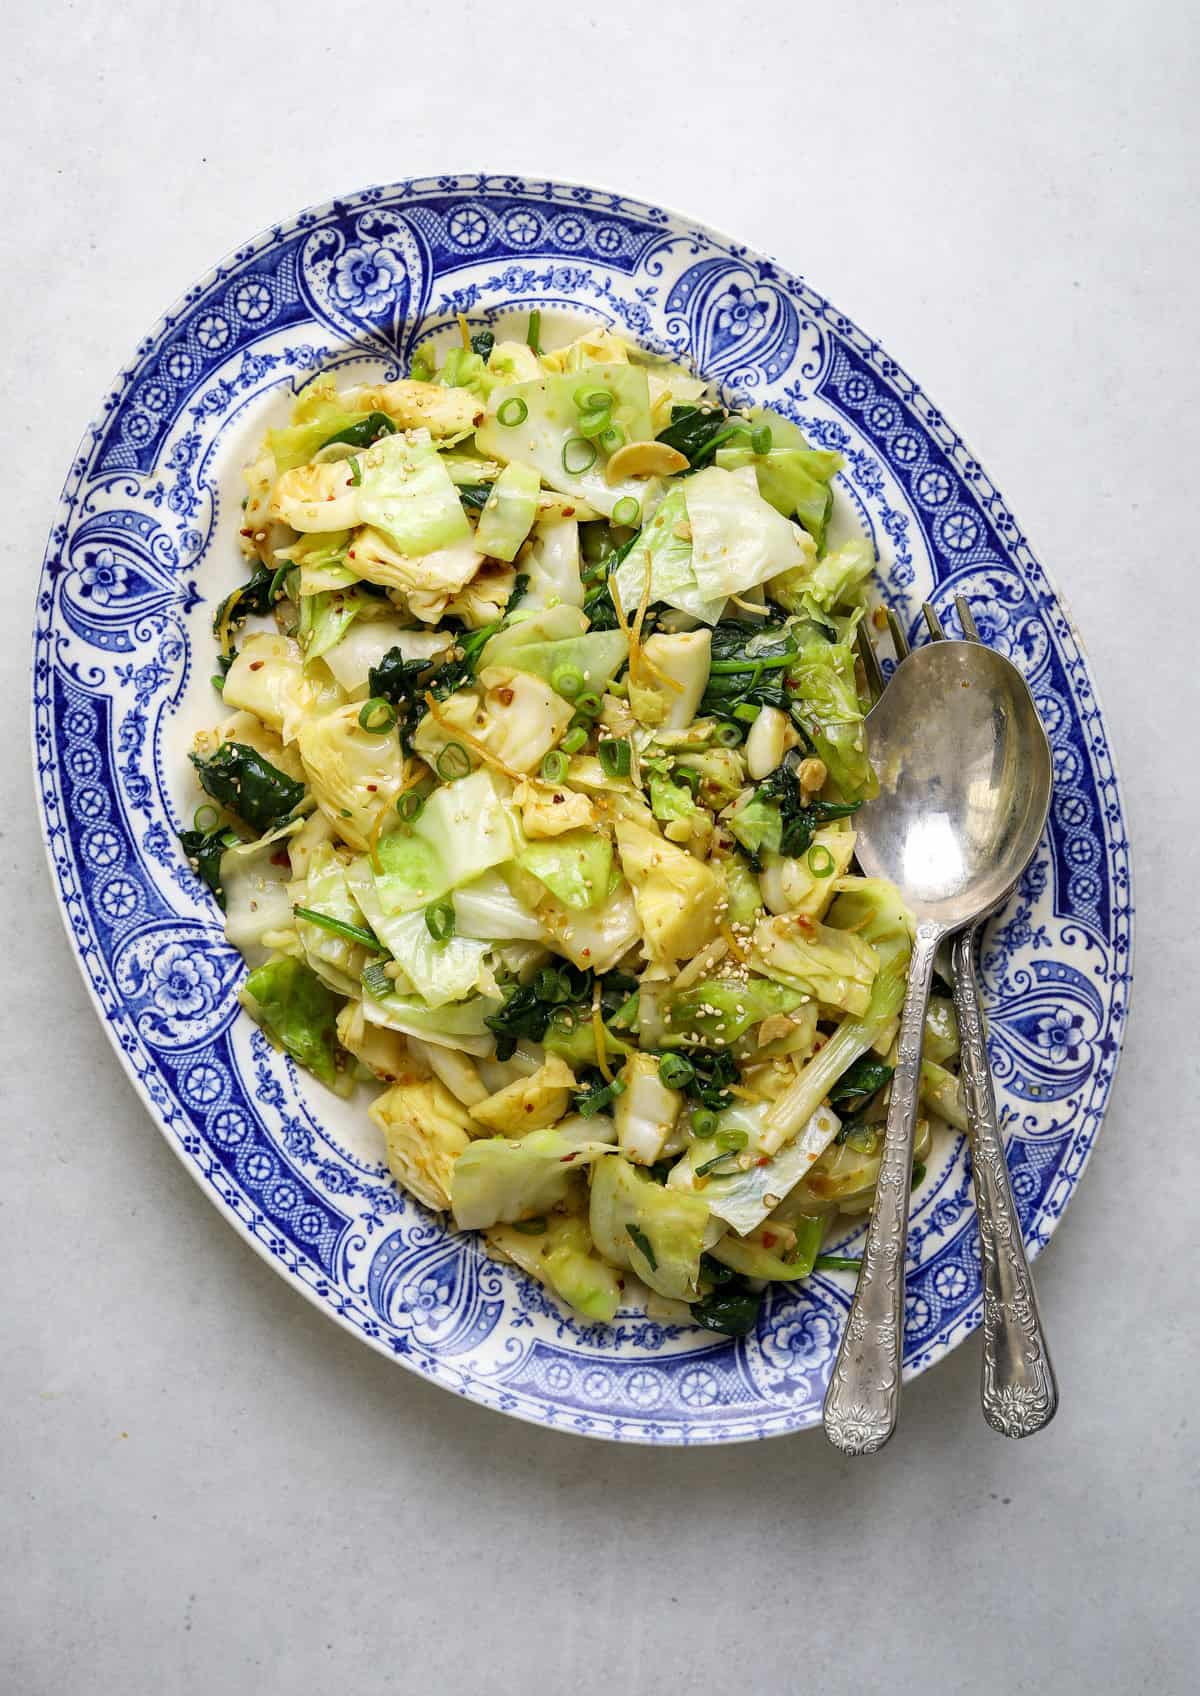 Sautéed Cabbage with Garlic, Ginger and Chili Oil